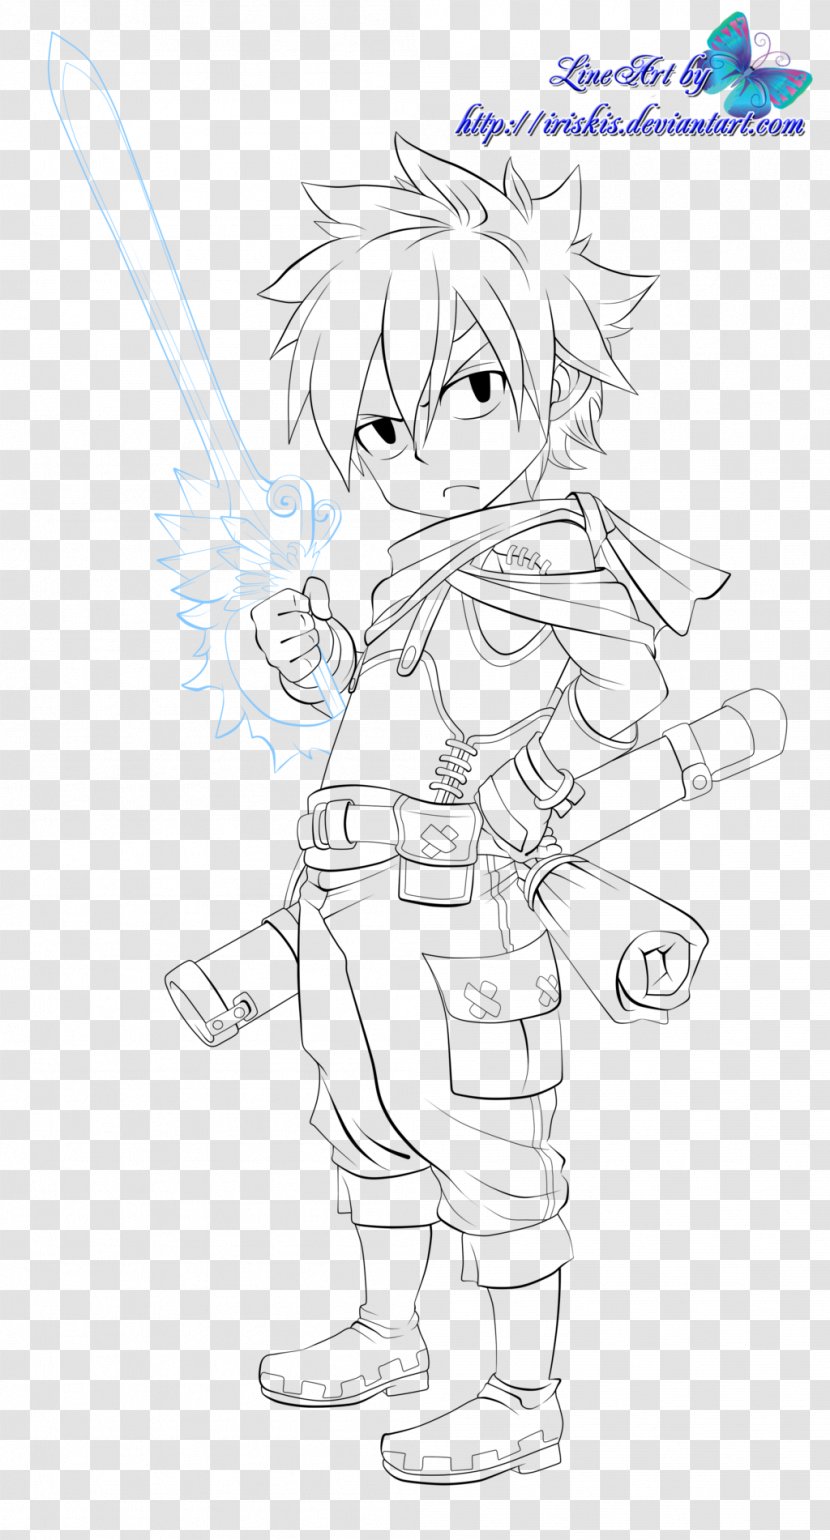 Gray Fullbuster Natsu Dragneel Fairy Tail Coloring Book Drawing - Tree Transparent PNG